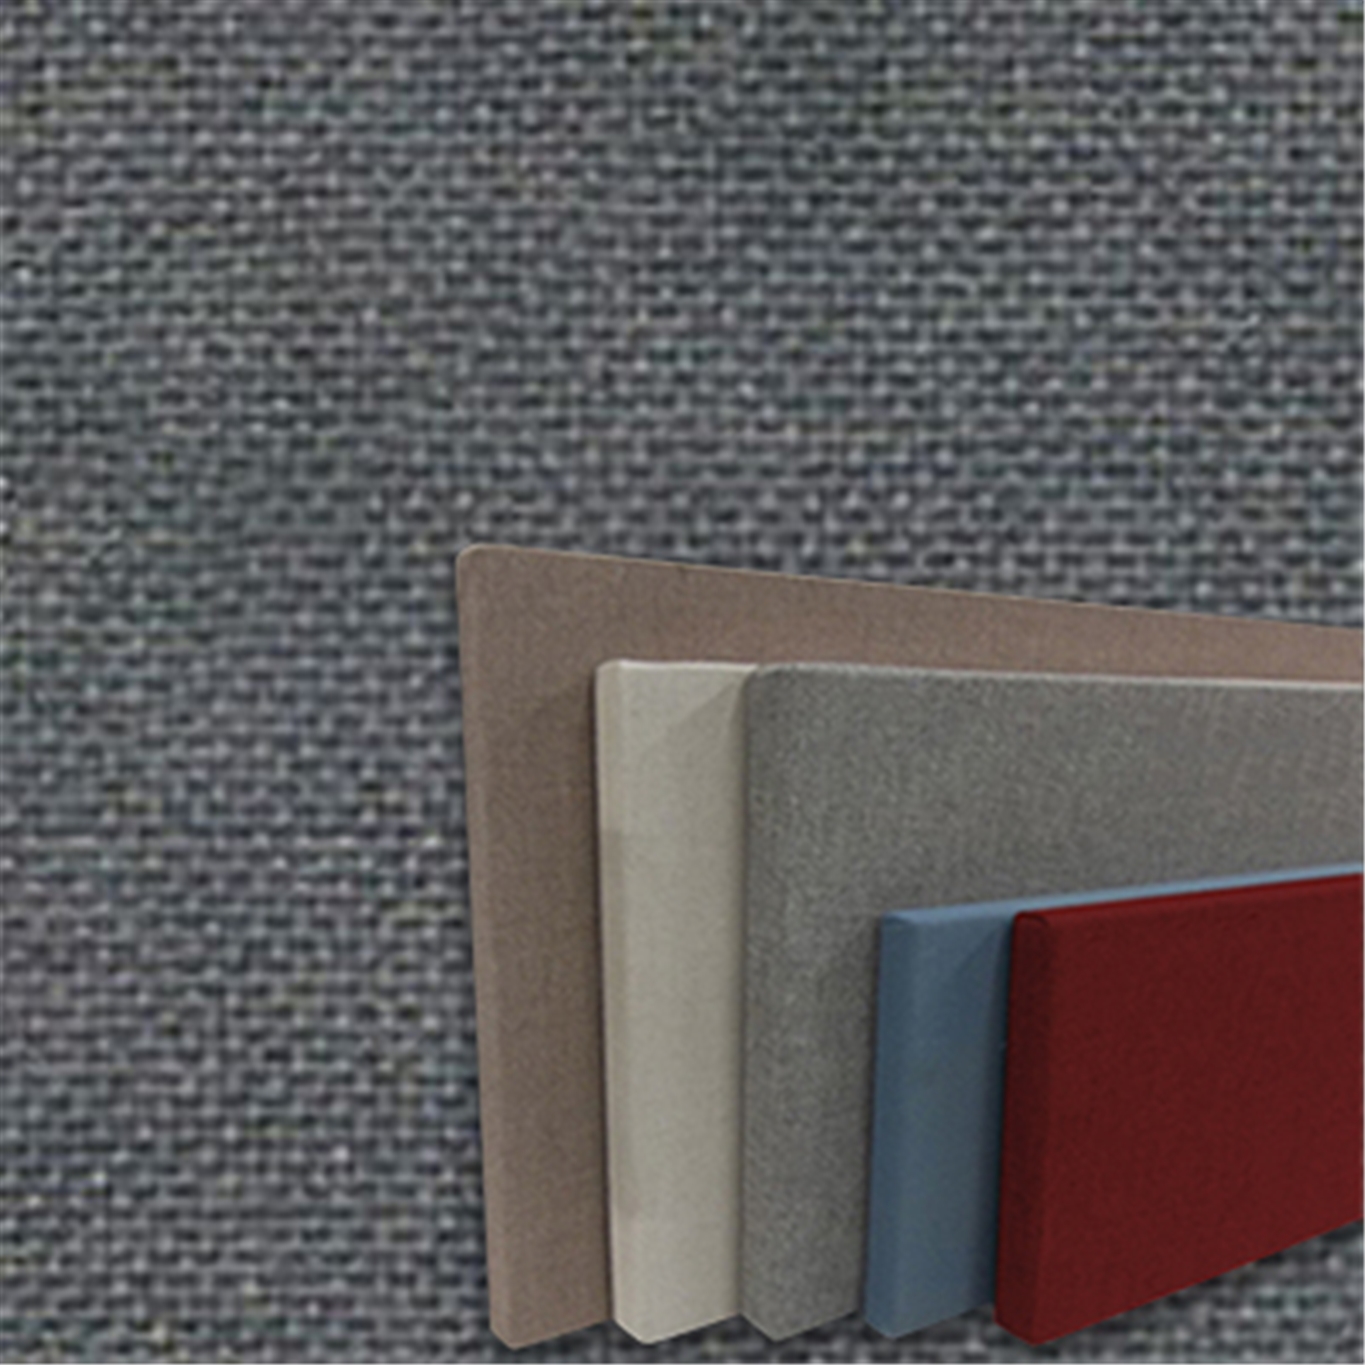 Velcro Loop Carpet Fabric Colors For Display Boards